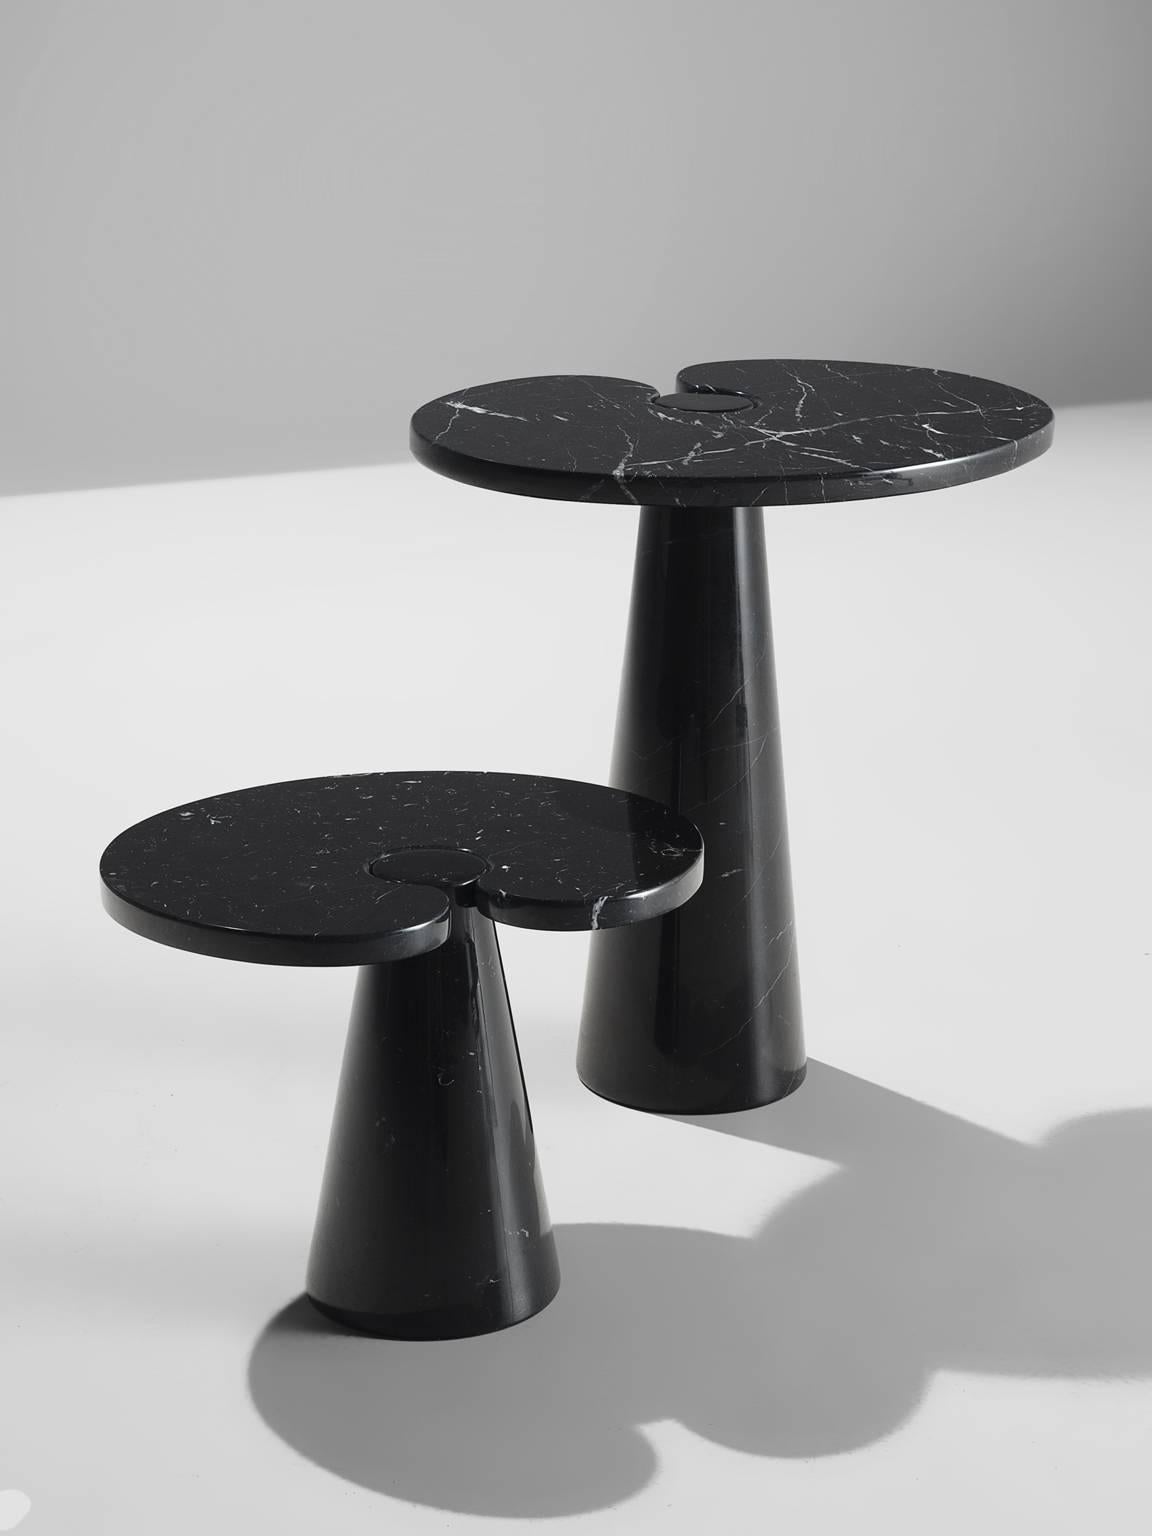 Angelo Mangiarotti, cocktail tables in black marble, Italy, 1970s. 

These sculptural table by Angelo Mangiarotti are a skillful example of postmodern design. The lotus leaf like table features no joints or clamps and is architectural in its